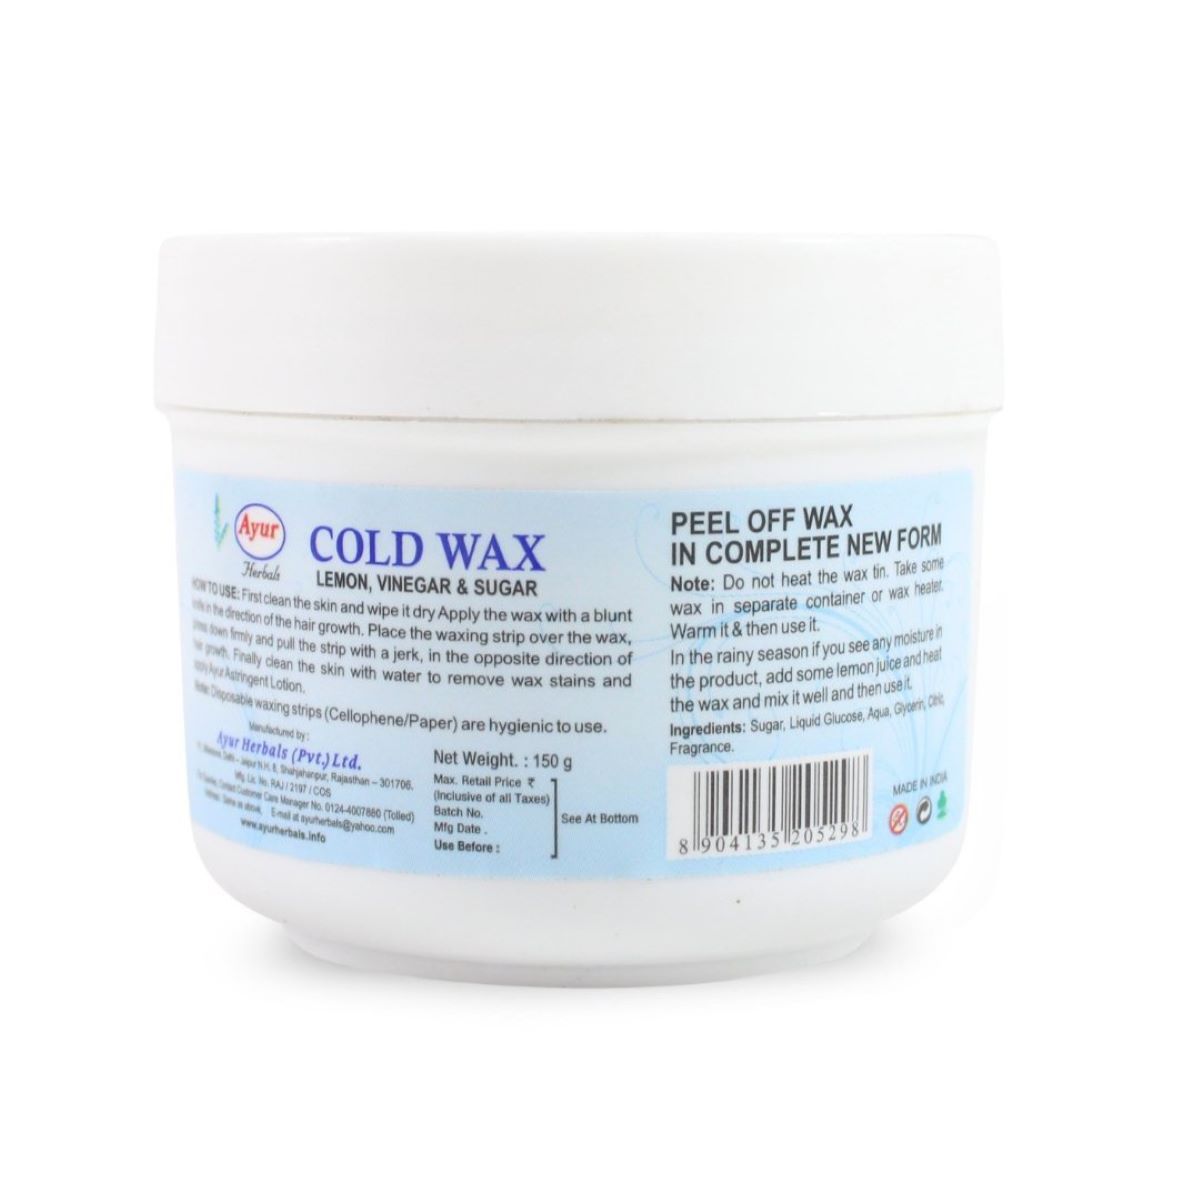 Ayur Herbal Cold Wax Hair Removal Cream, 150 gm Price, Uses, Side Effects,  Composition - Apollo Pharmacy